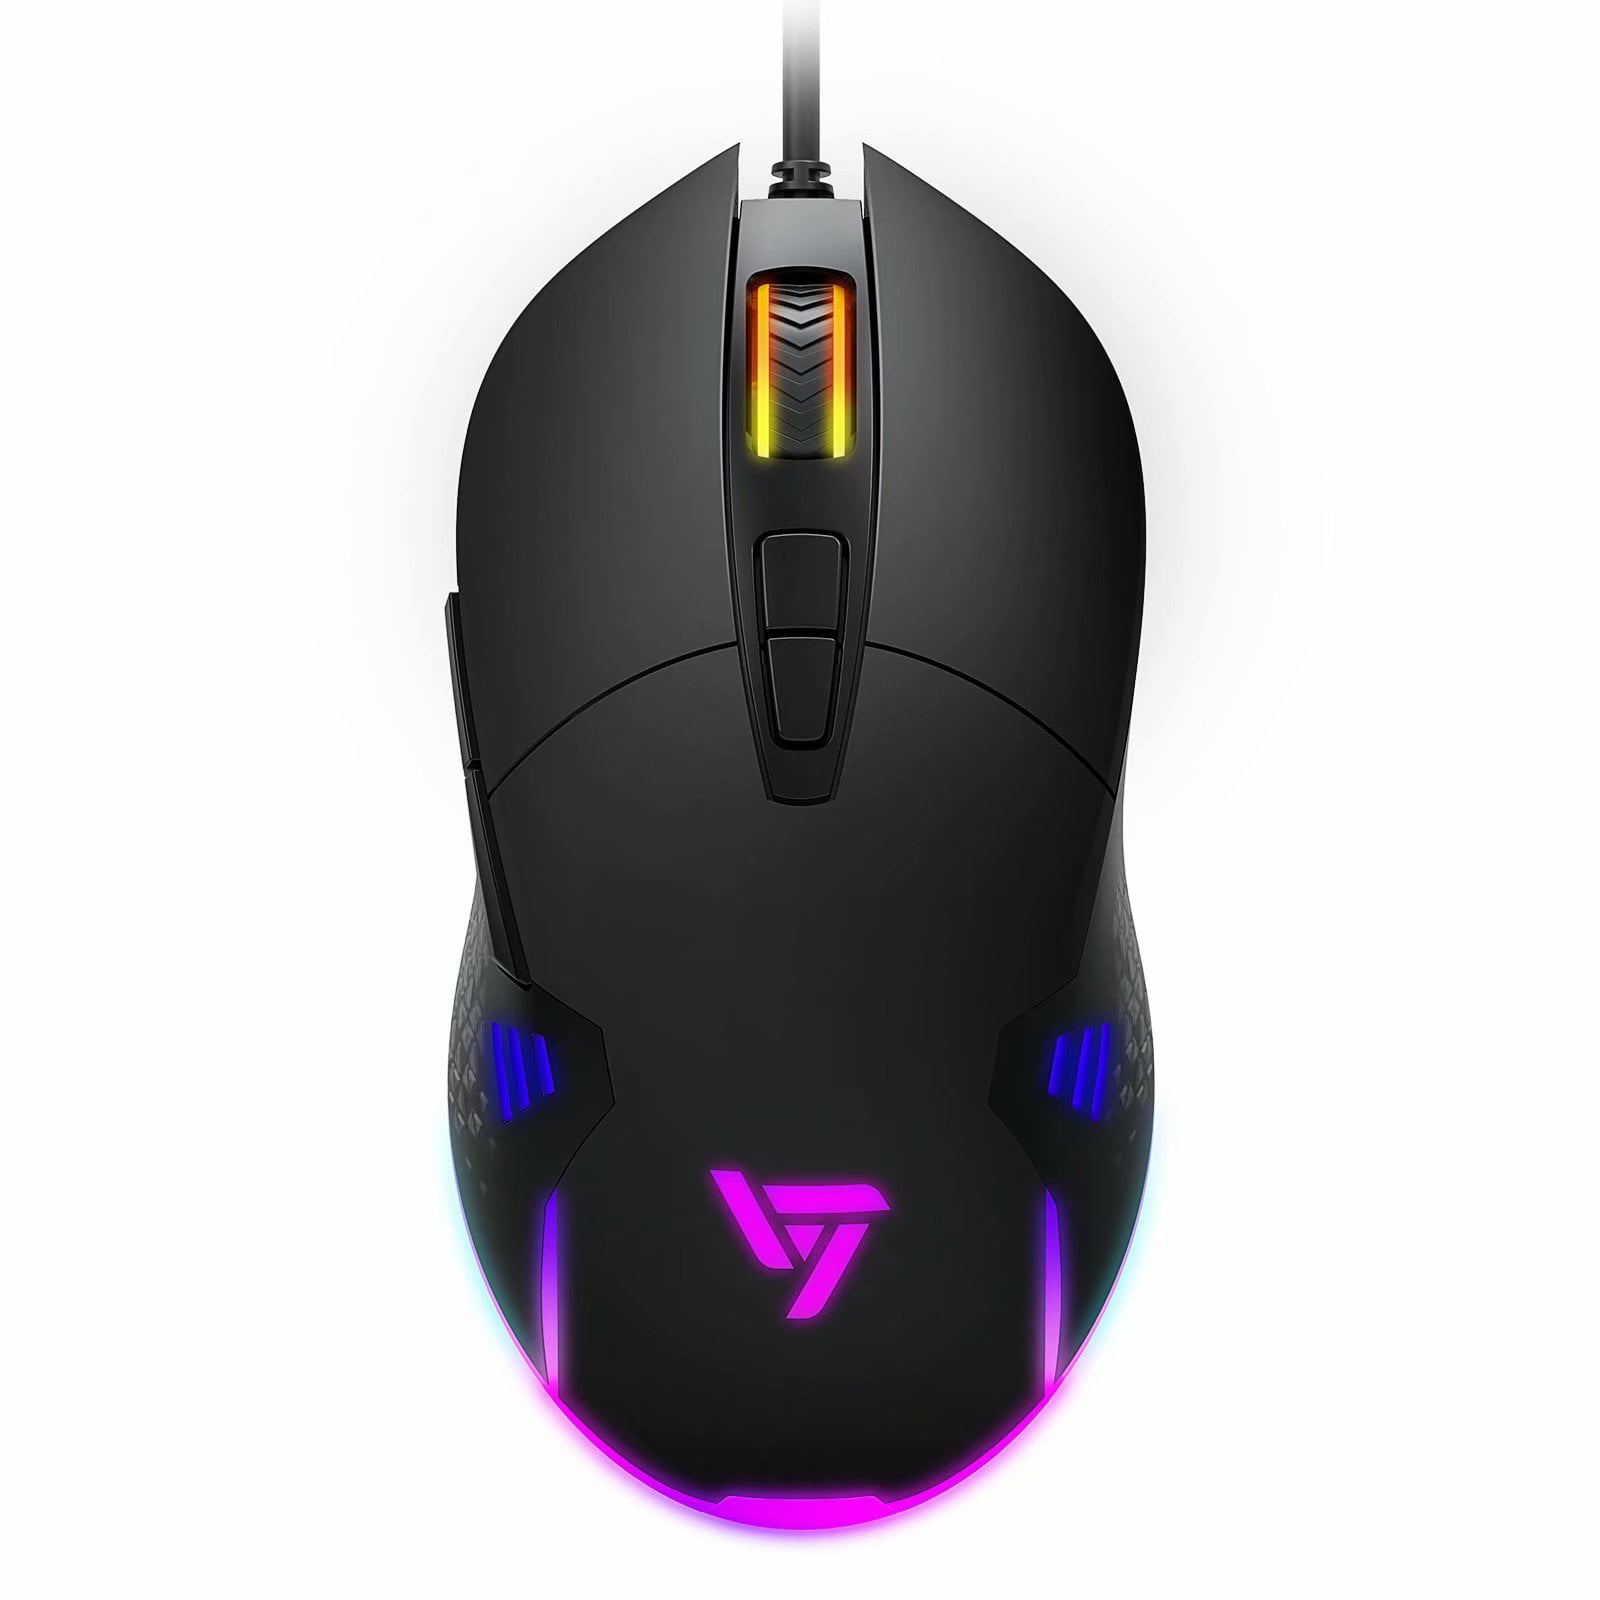 PHILIPS 3-Button Wired Computer Mouse with RGB â€œAmbiglowâ€ FX 